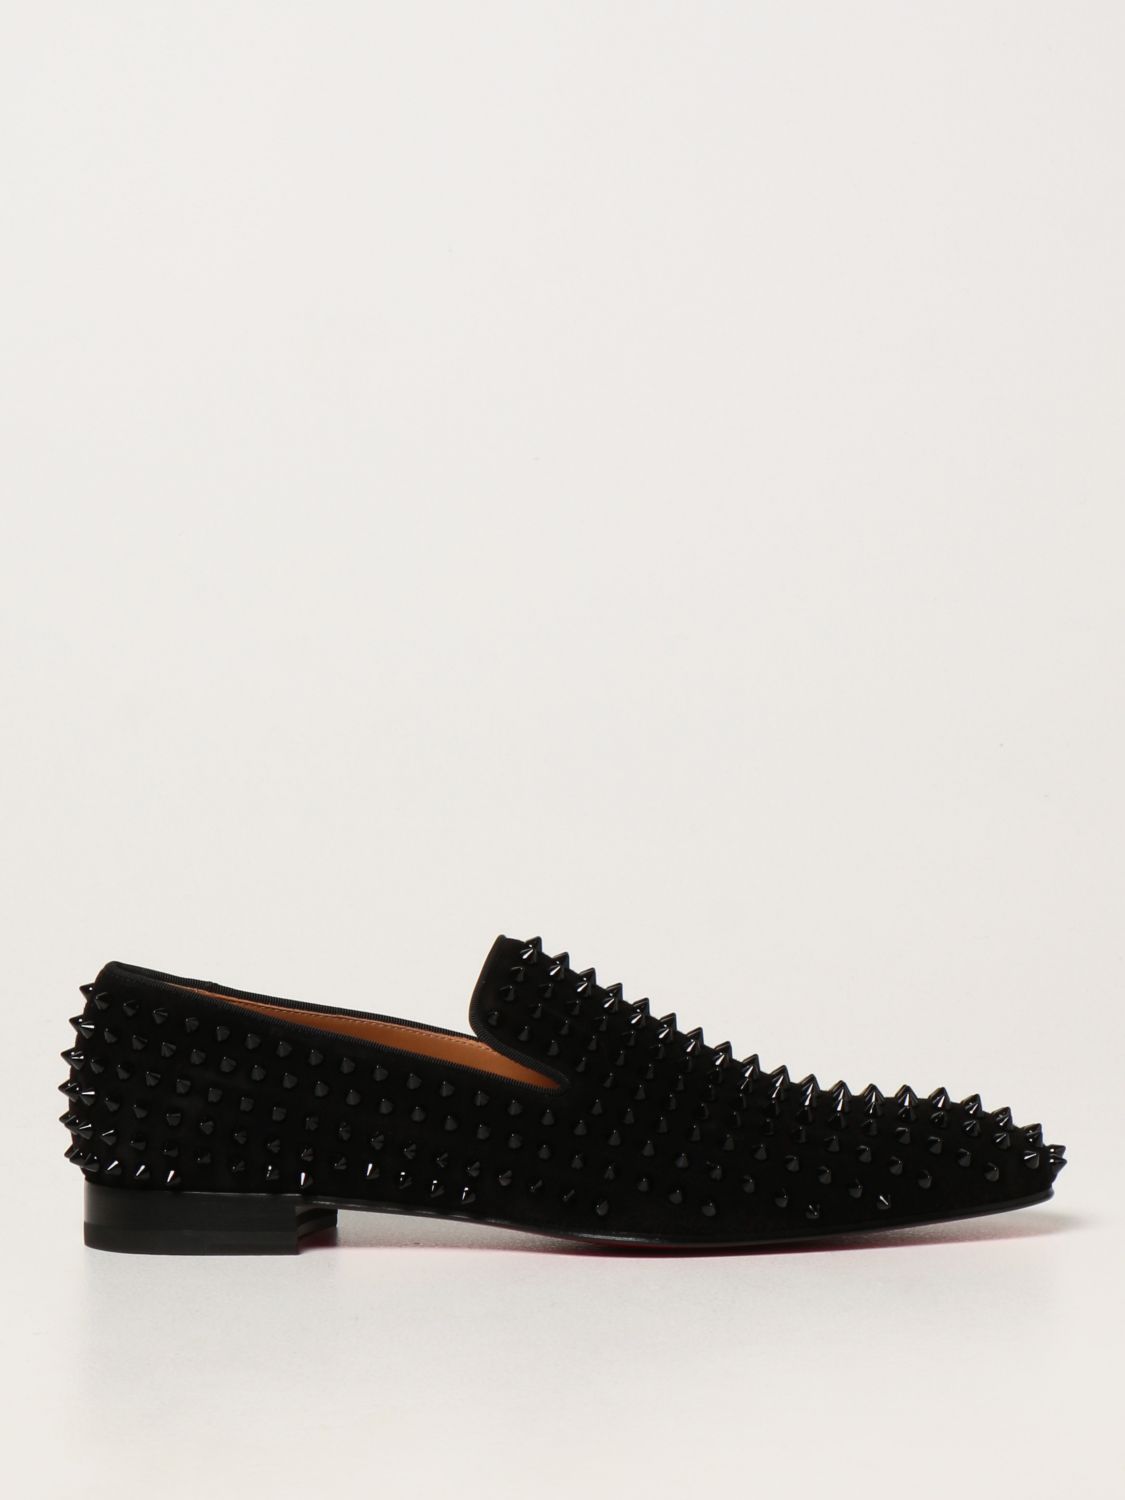 CHRISTIAN LOUBOUTIN: Shoes men | Loafers Christian Louboutin Men Black | Loafers Louboutin